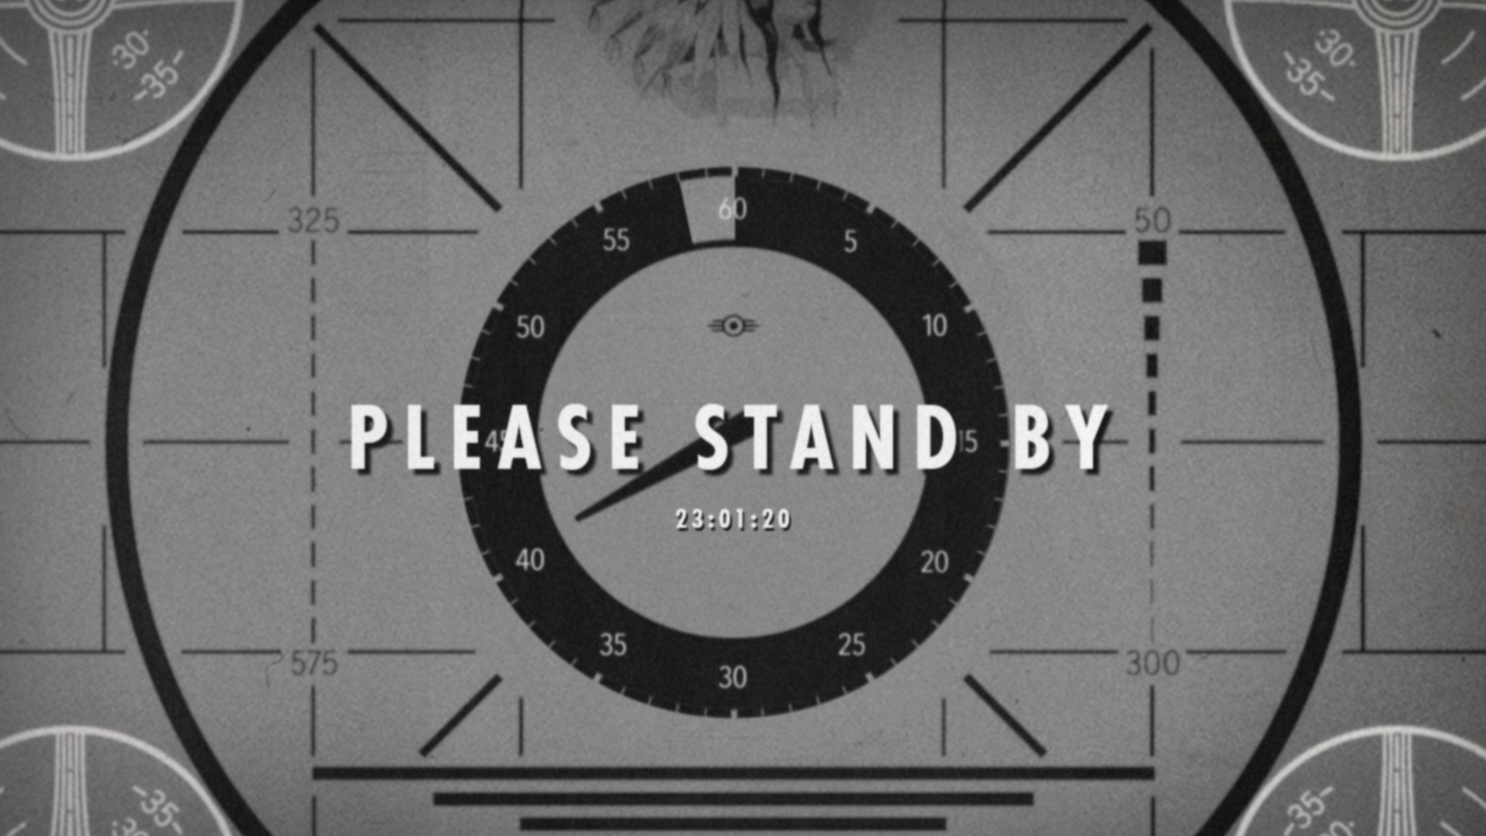 4 hours left. Stand by режим. Please Stand by Fallout обои на телефон. Фоллаут 4 please Stand by. Please Stand by без фона.